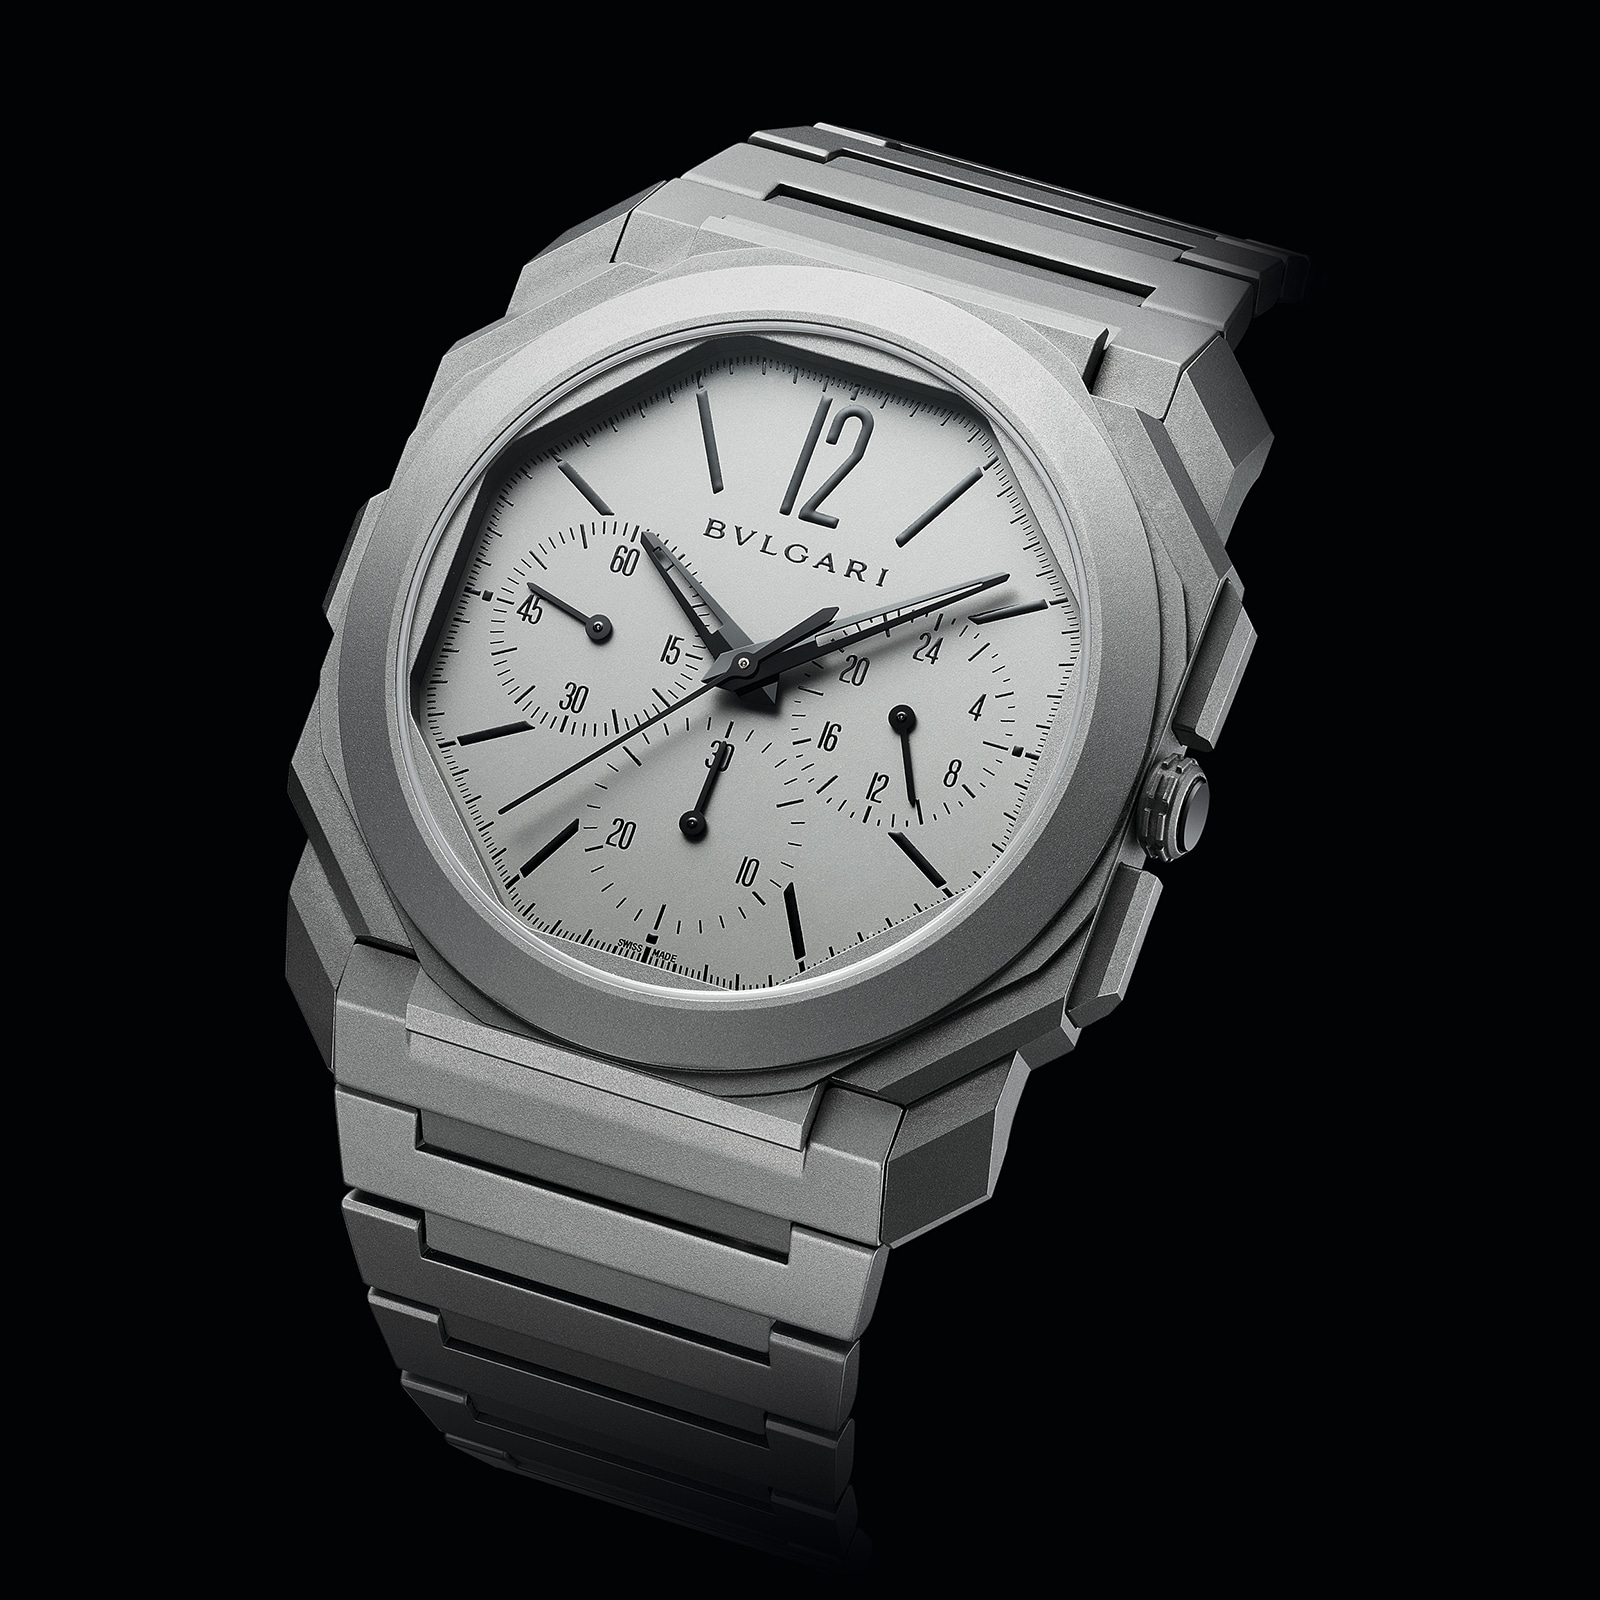 Titanium Octo Finissimo 42mm Grey Dial Automatic Chronograph Gents Watch